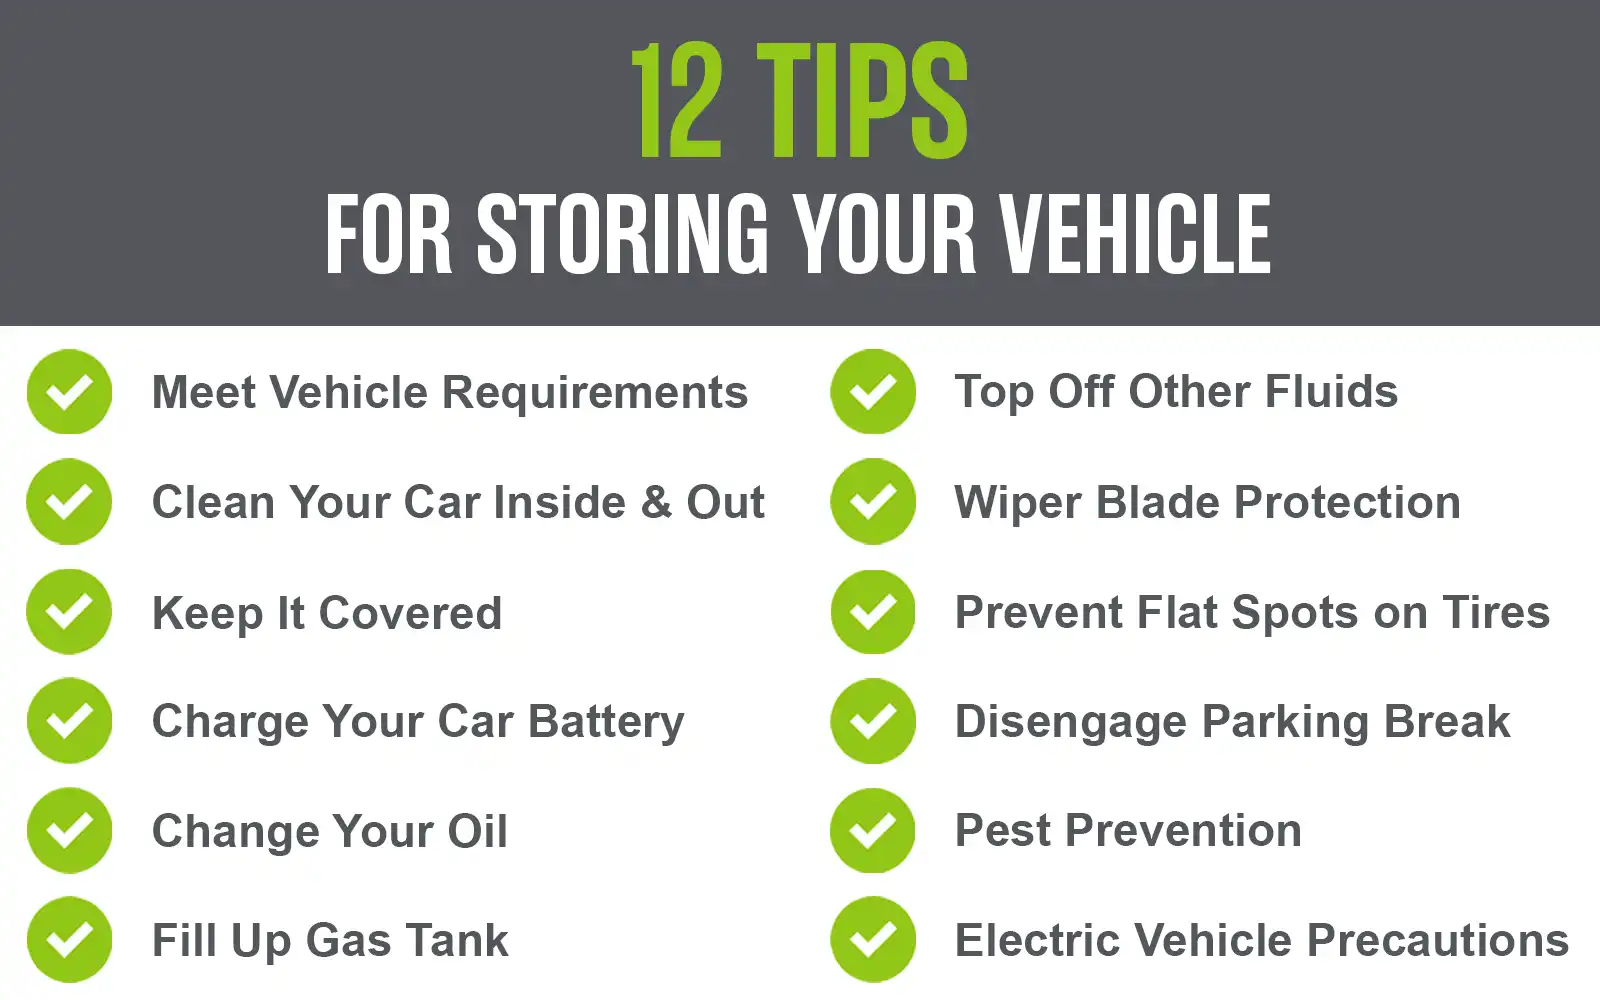 12 tips for storing a car include, ensuring you meet vehicle storage requirements, clean your car inside and out, keep it covered, charge your car battery, change your oil, fill up your gas tank, top off other fluids, consider wiper blade protection, prevent flat spots on tires, disengage the parking brake, take measures to keep pests away, and consider precautions for electric vehicle storage. 